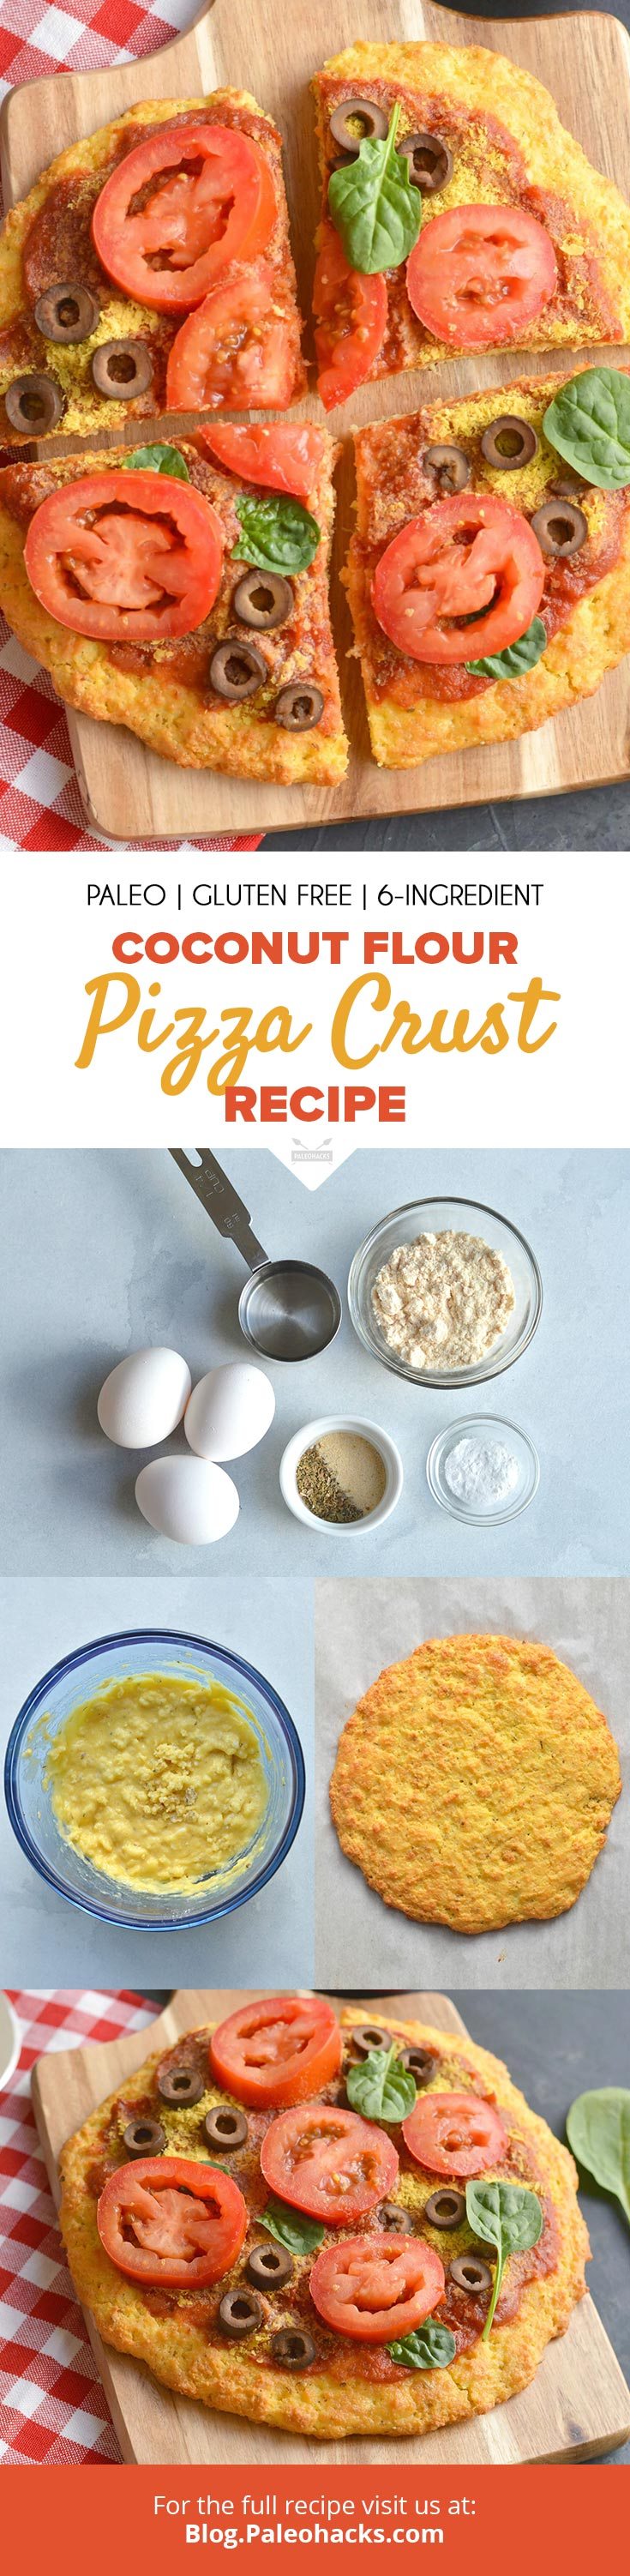 Bake up this easy coconut flour pizza crust as the perfect base for piling on your favorite toppings.